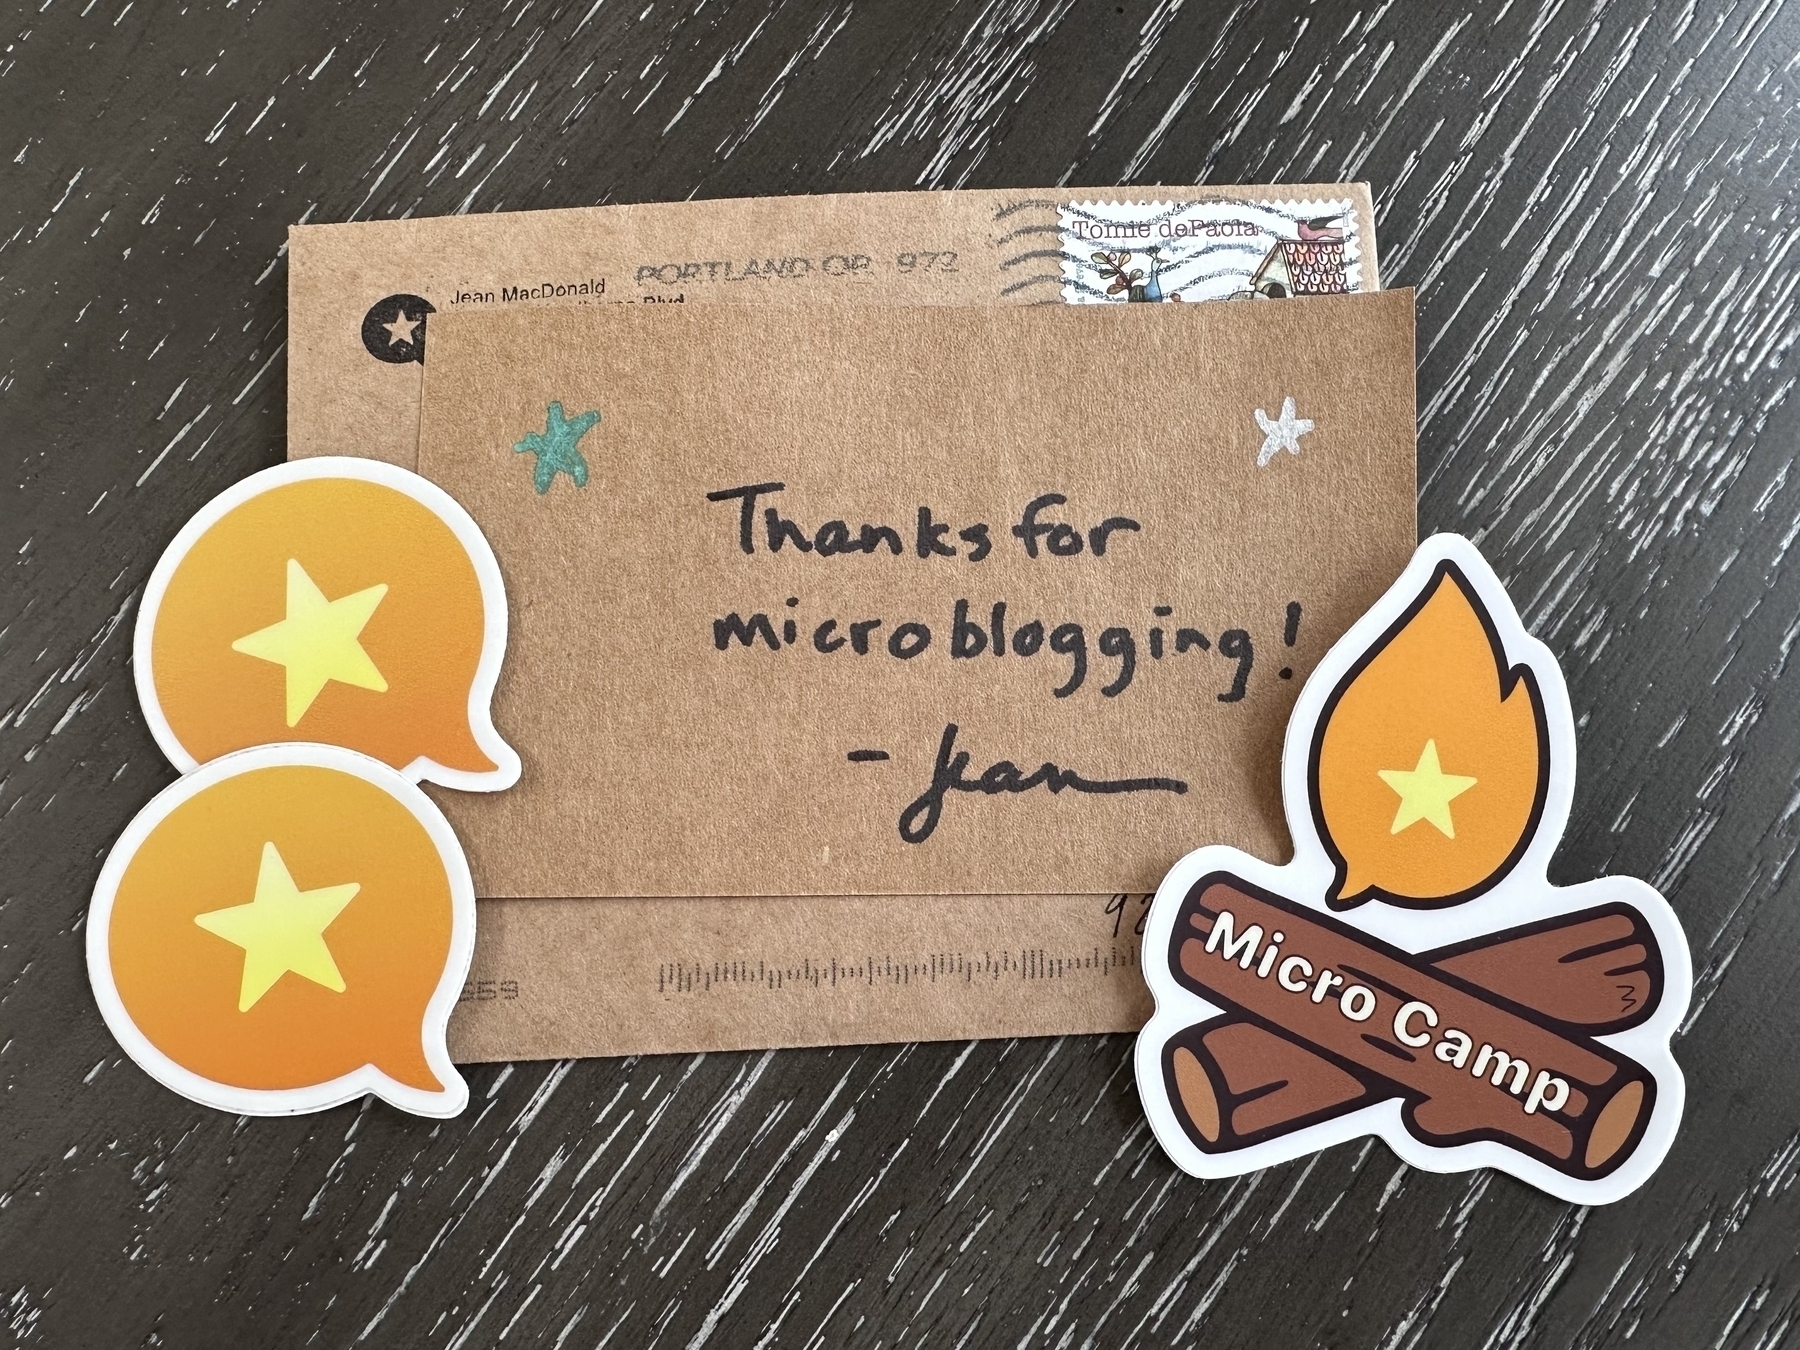 Awesome Micro.blog decals from [@jean](https://micro.blog/jean).